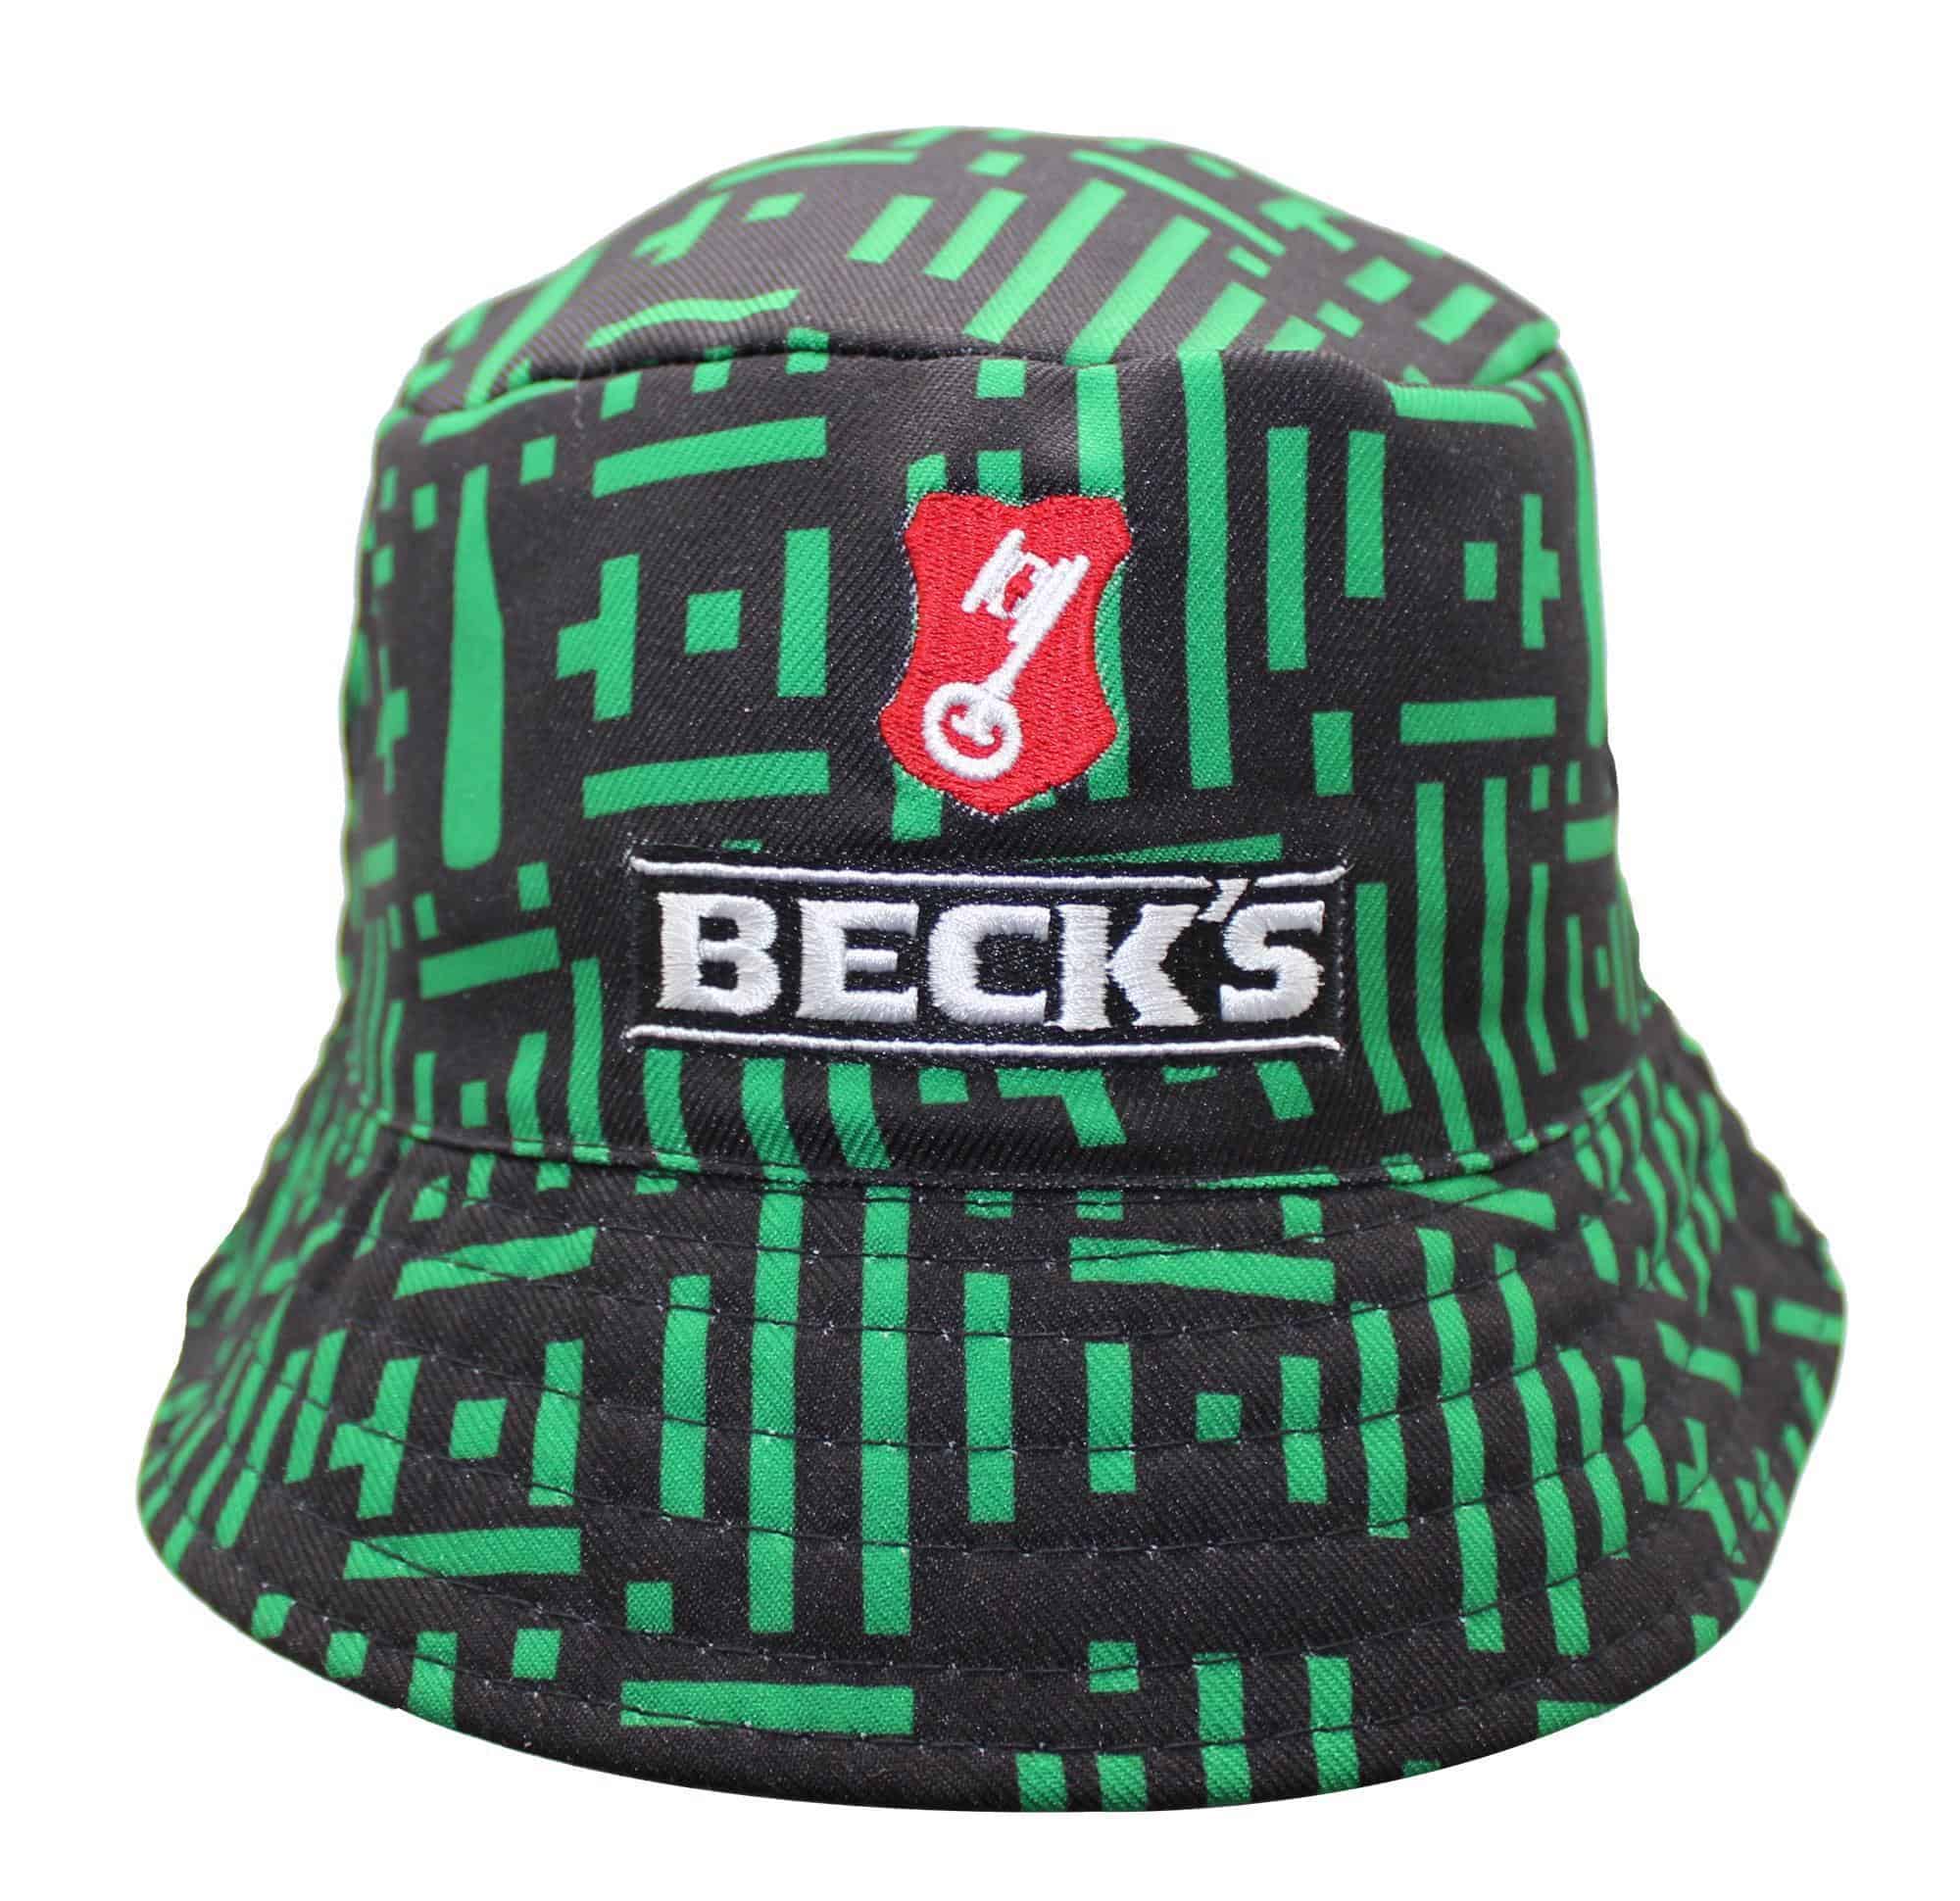 Becks Sublimated Bucket Hats Headwear and Accessories